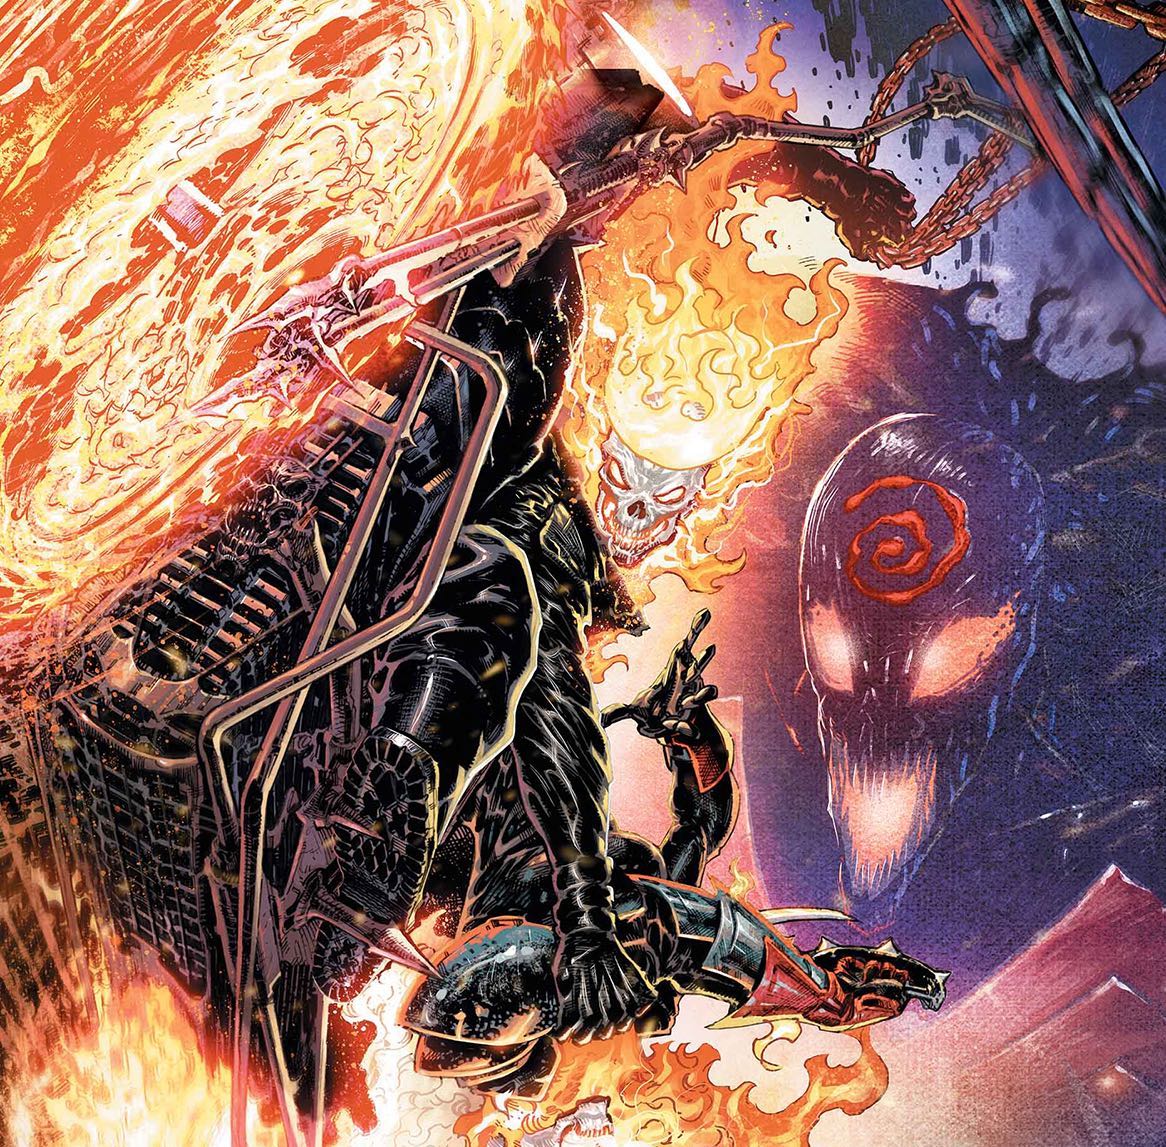 Absolute Carnage: Symbiote of Vengeance #1 Review